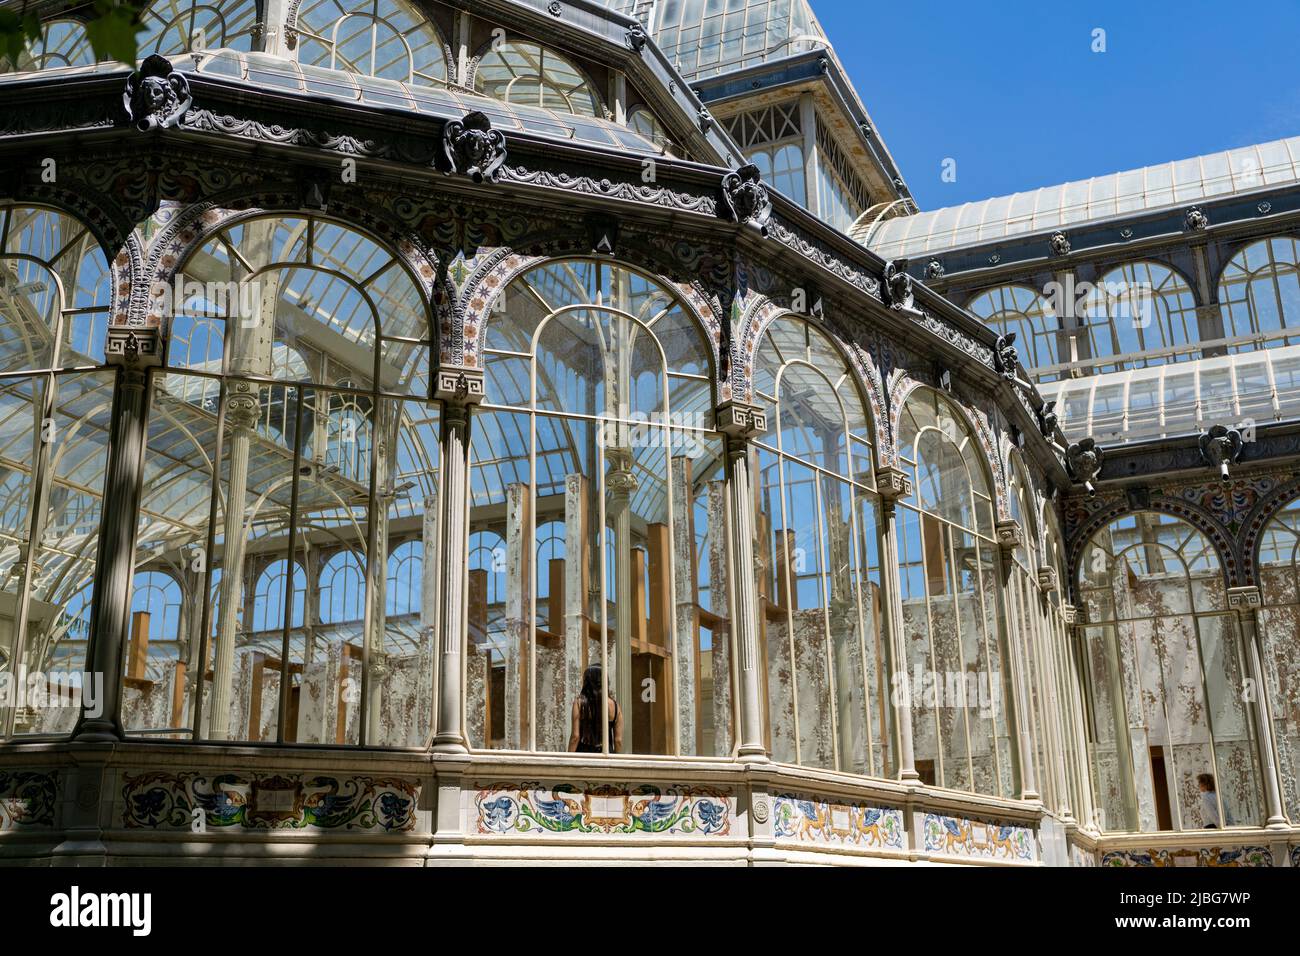 The Glass Palace at El Retiro Park in Madrid by architect Ricardo Velázquez Bosco. A UNESCO World Heritage Site. Owned by the Reina Sofía Museum. Stock Photo